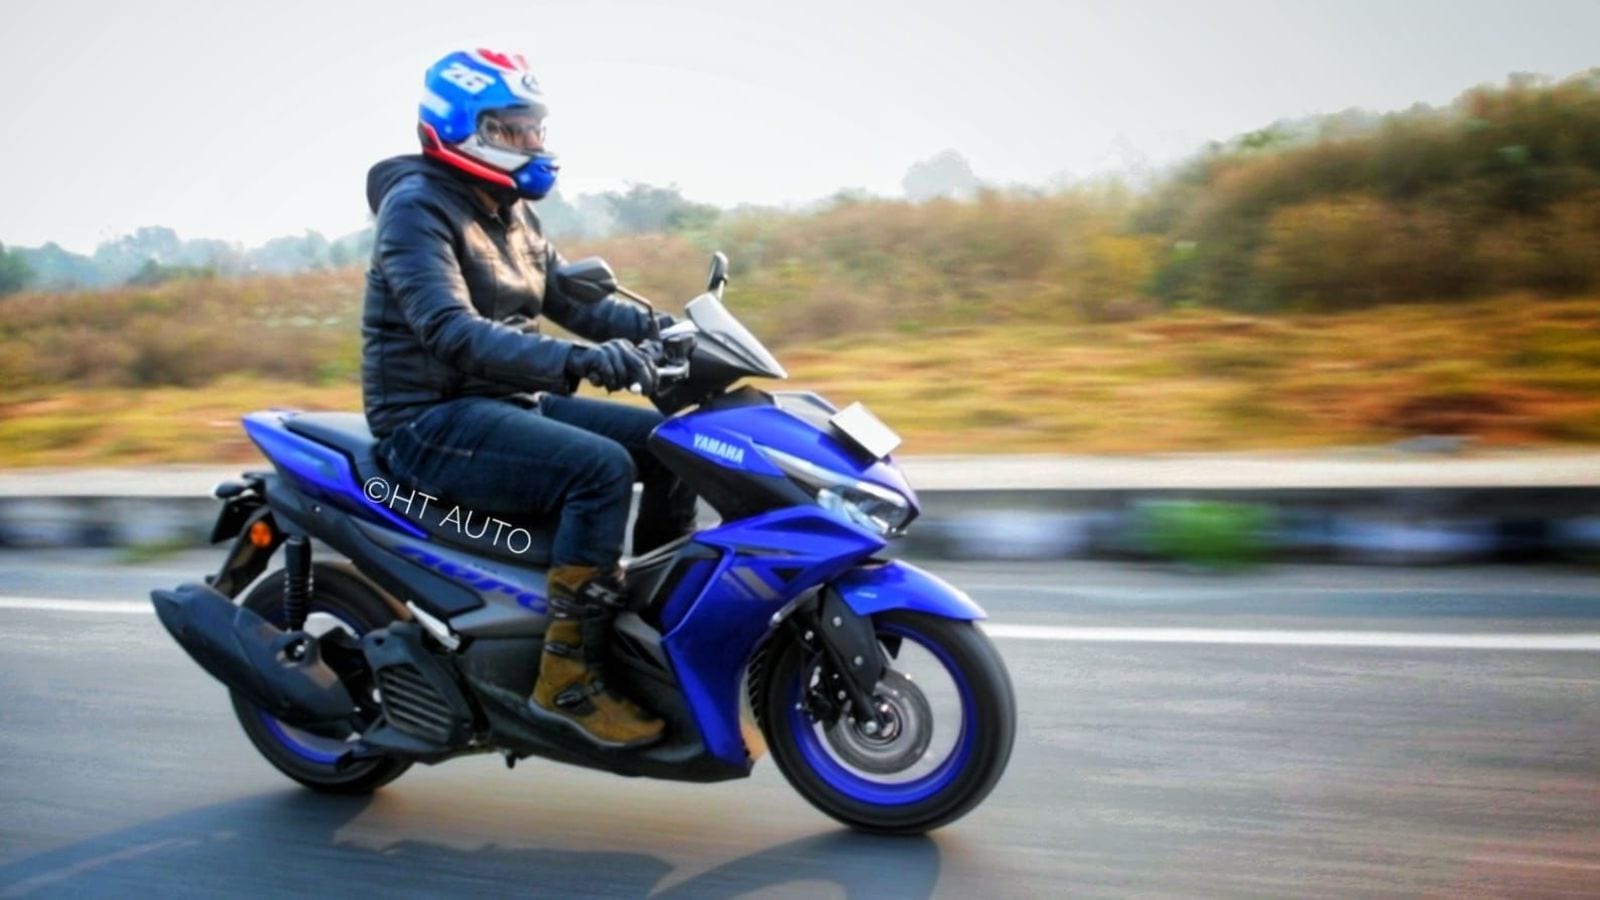 2022 Yamaha Aerox 155 specifications and pictures